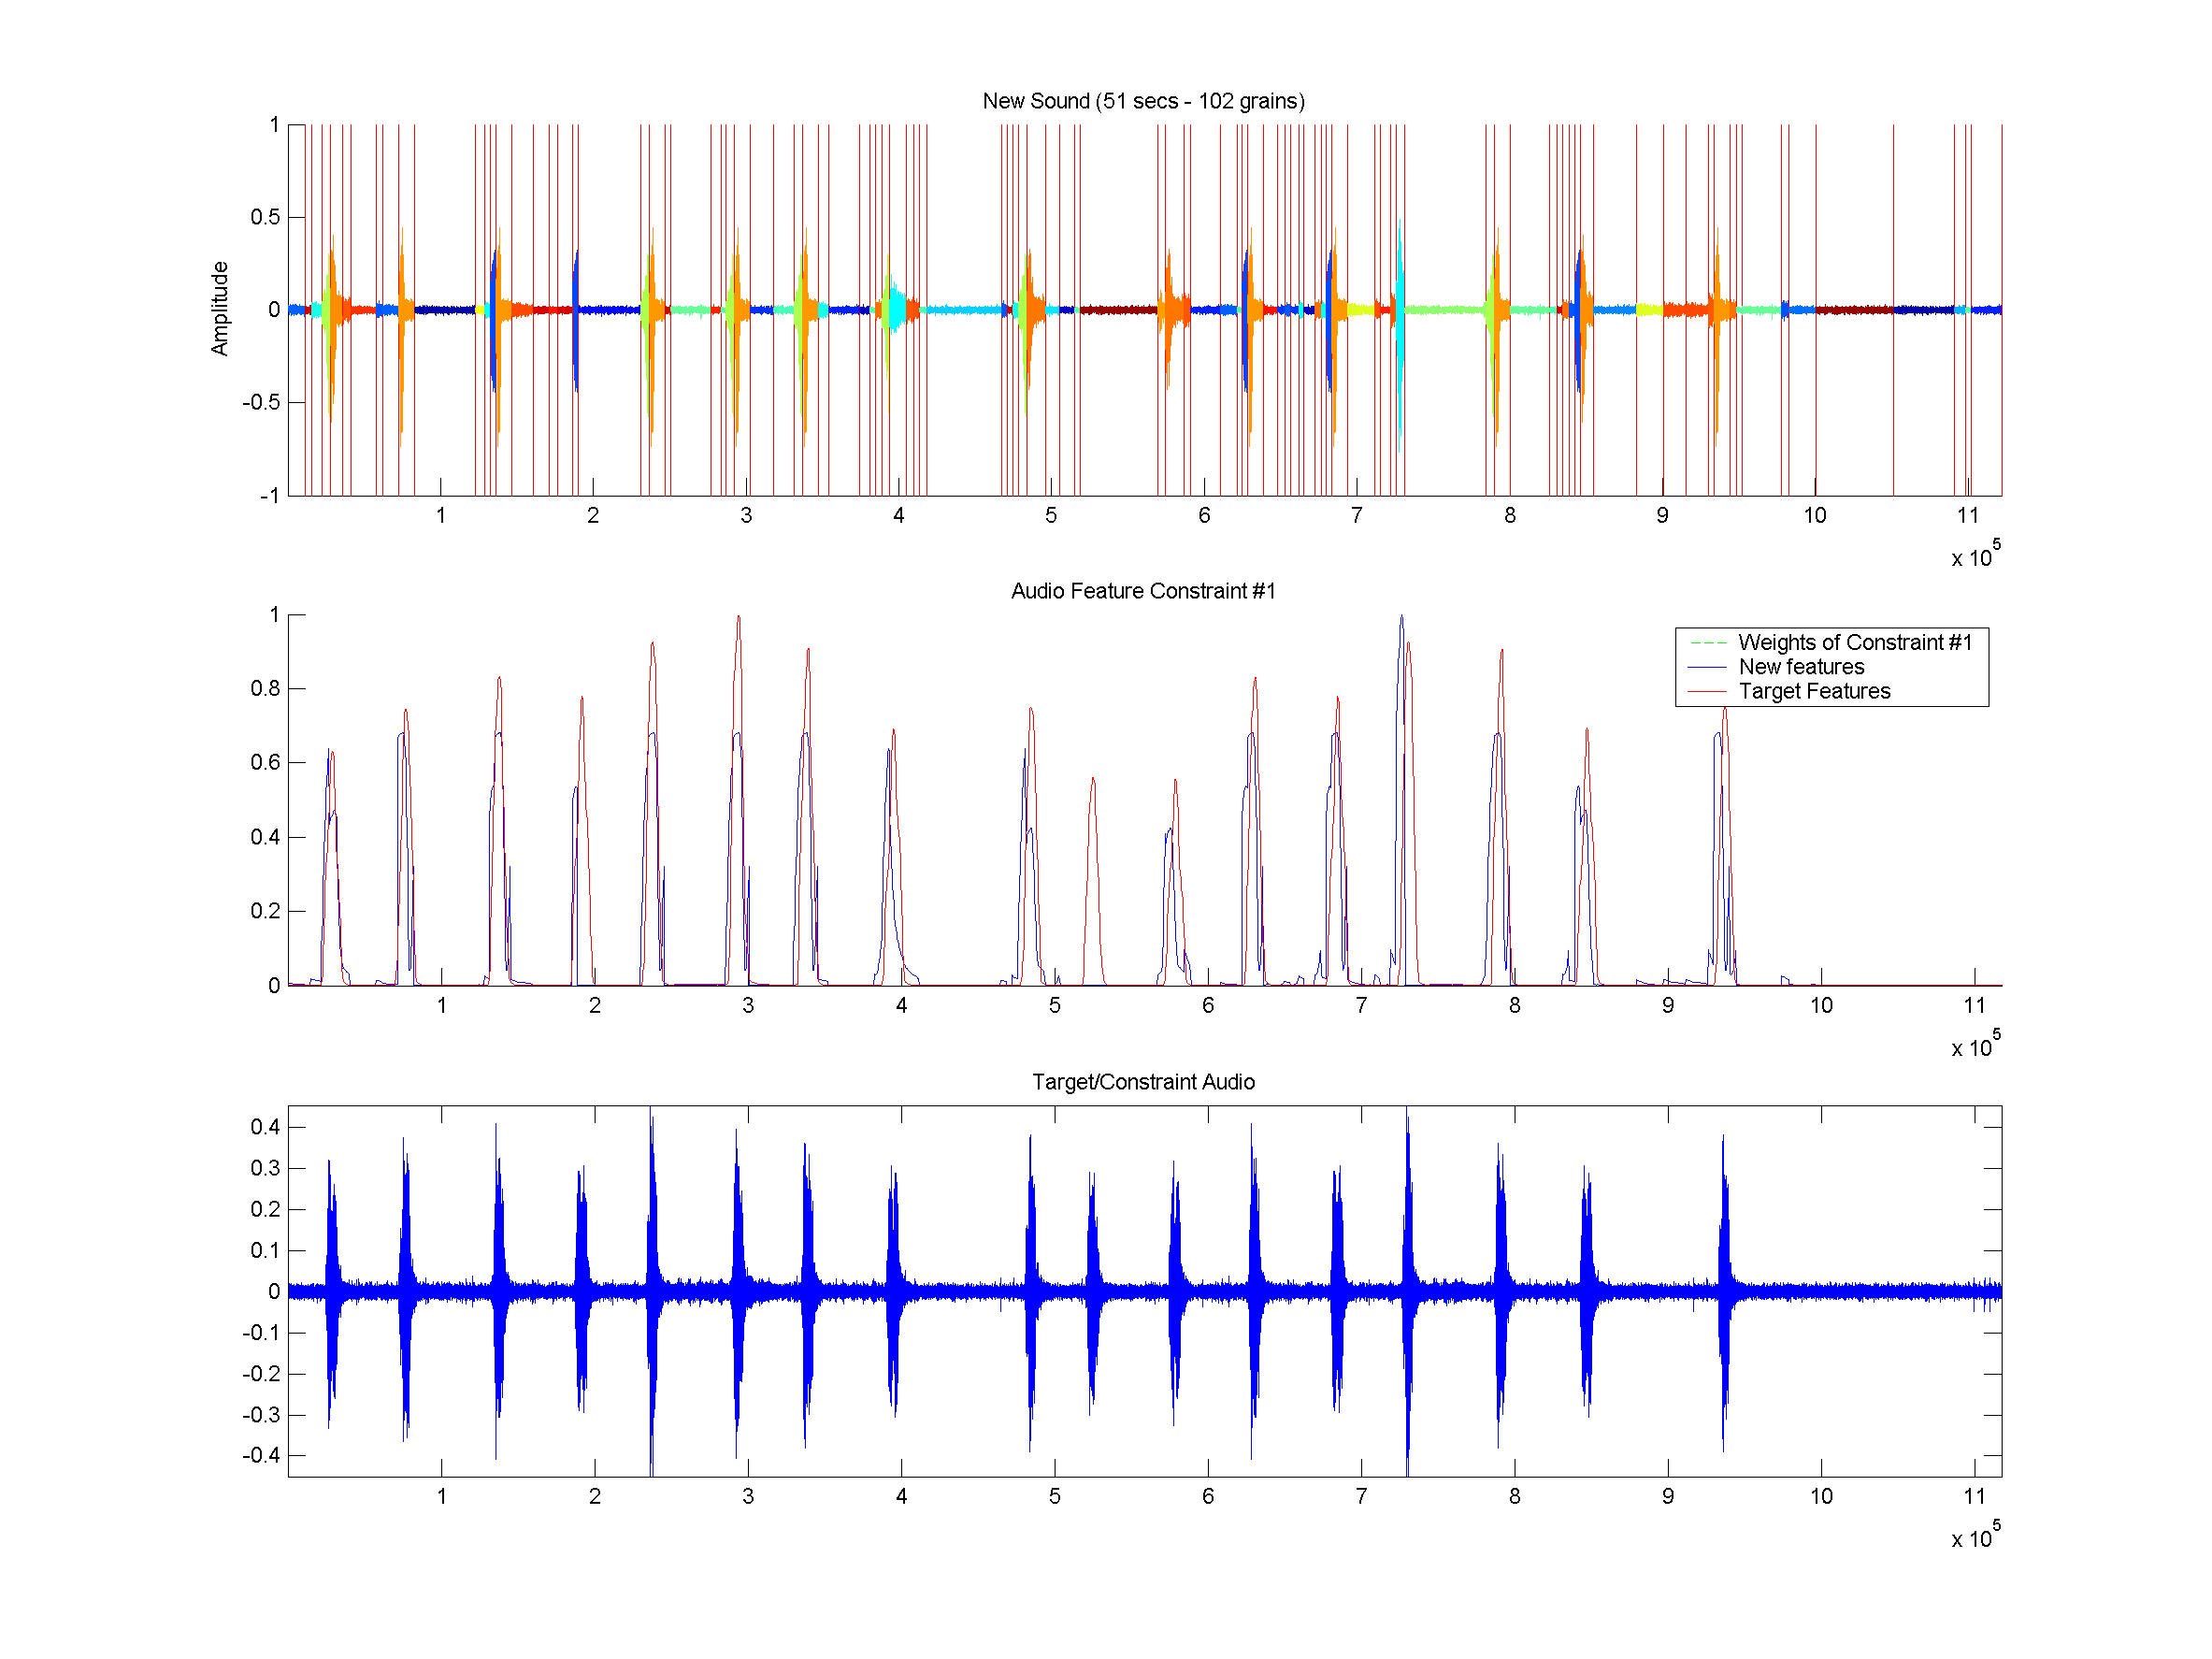 (top) Shows the old segmented sound along each constraints source segments. (middle) Shows the synthesized sound. (bottom) Shows Constraint targets along with how the origin of the grains in these targets regions.